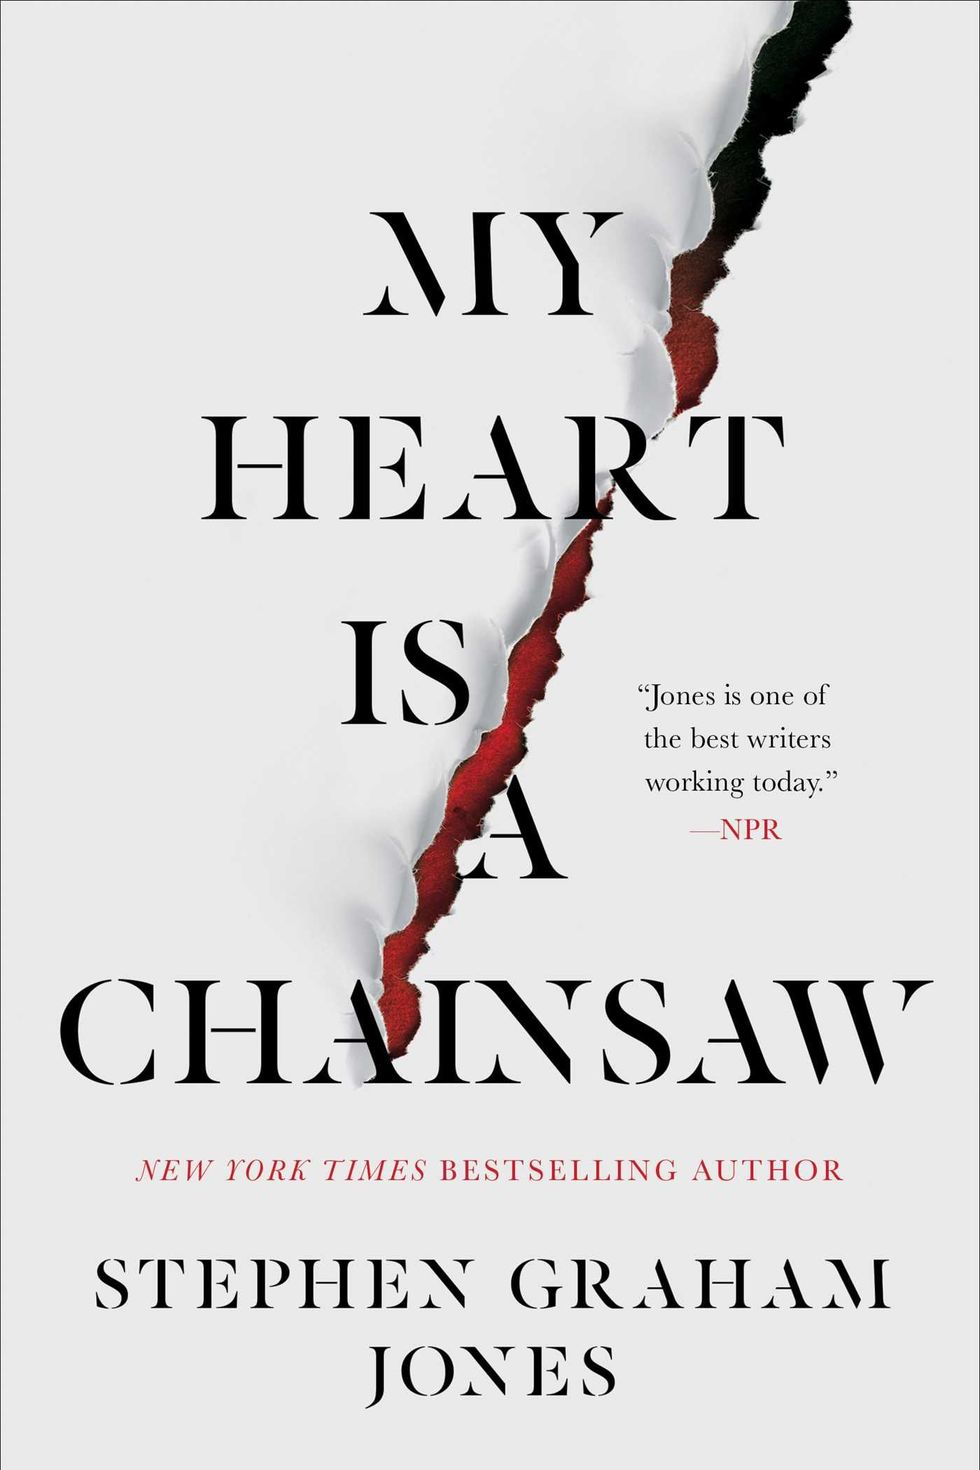 "My Heart Is a Chainsaw" by Stephen Graham Jones